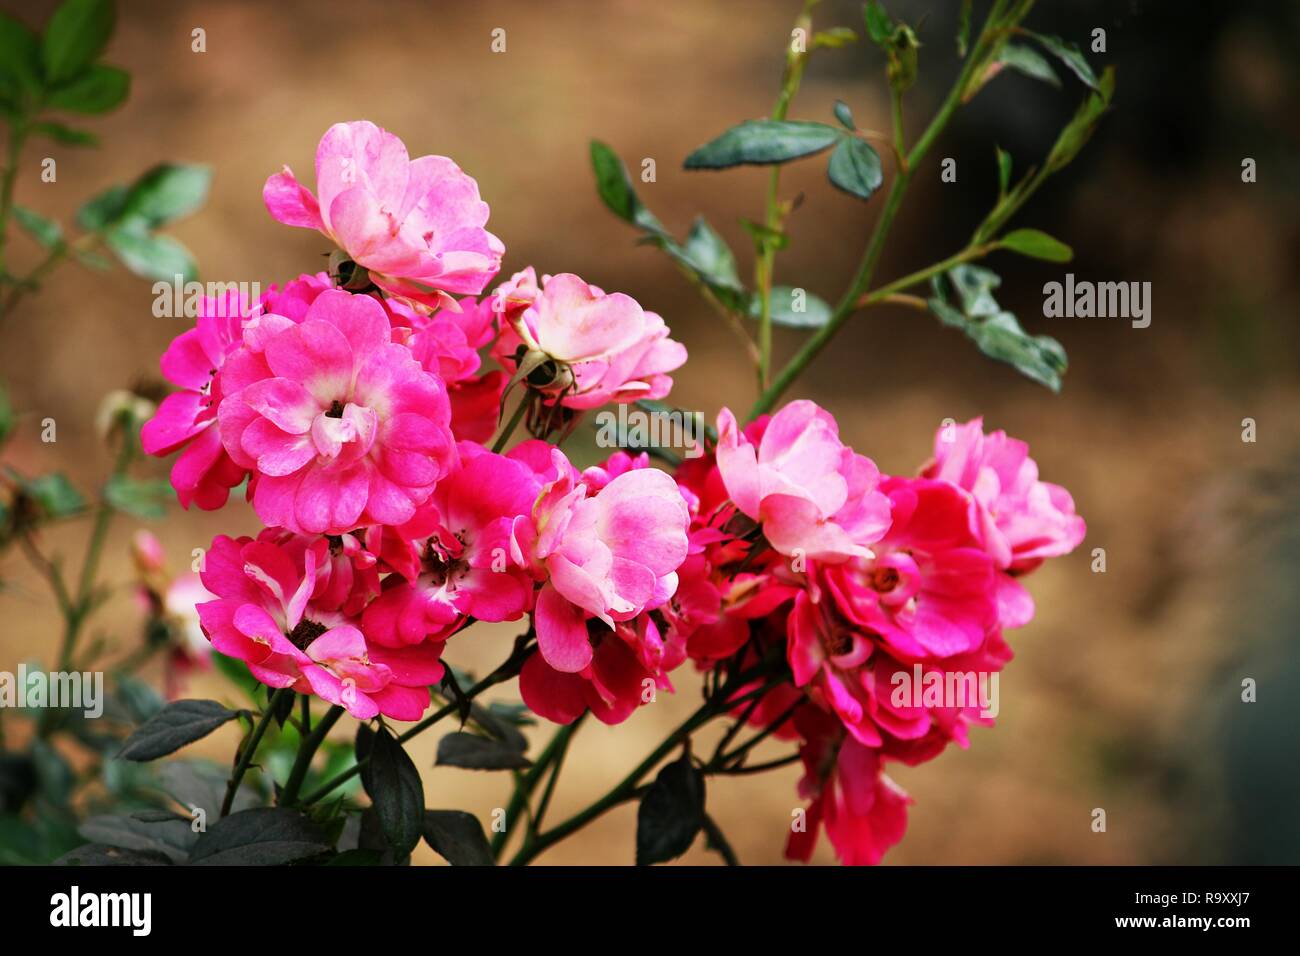 Beautiful pink flowers in the garden Stock Photo